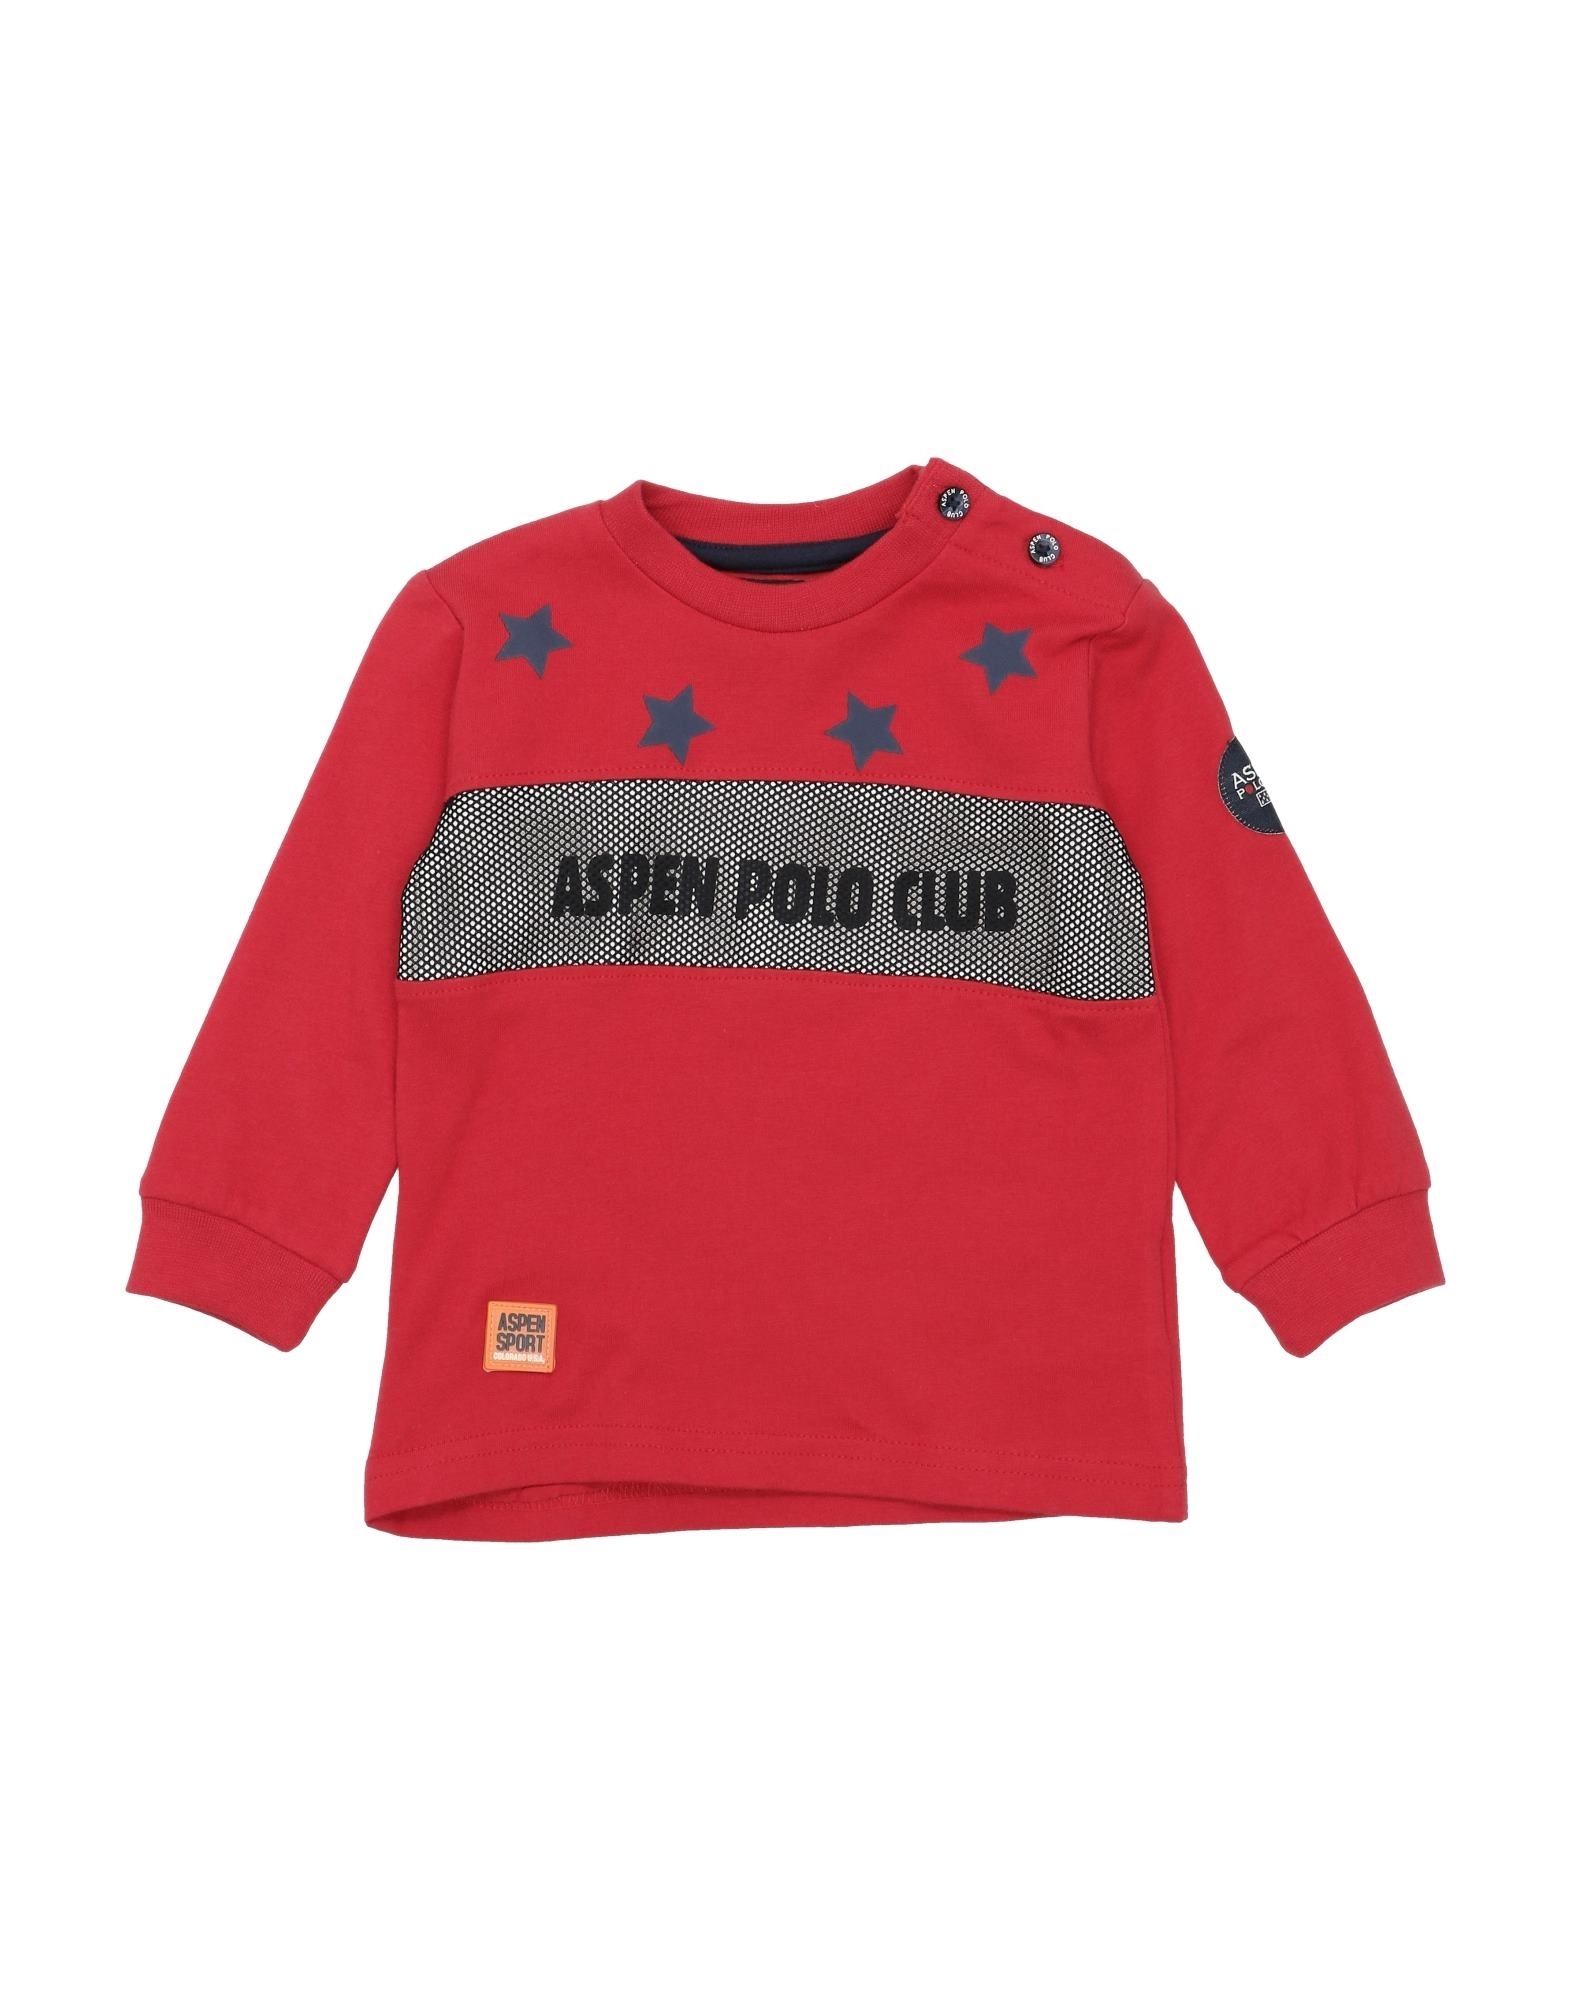 Aspen Polo Club Kids' T-shirts In Red